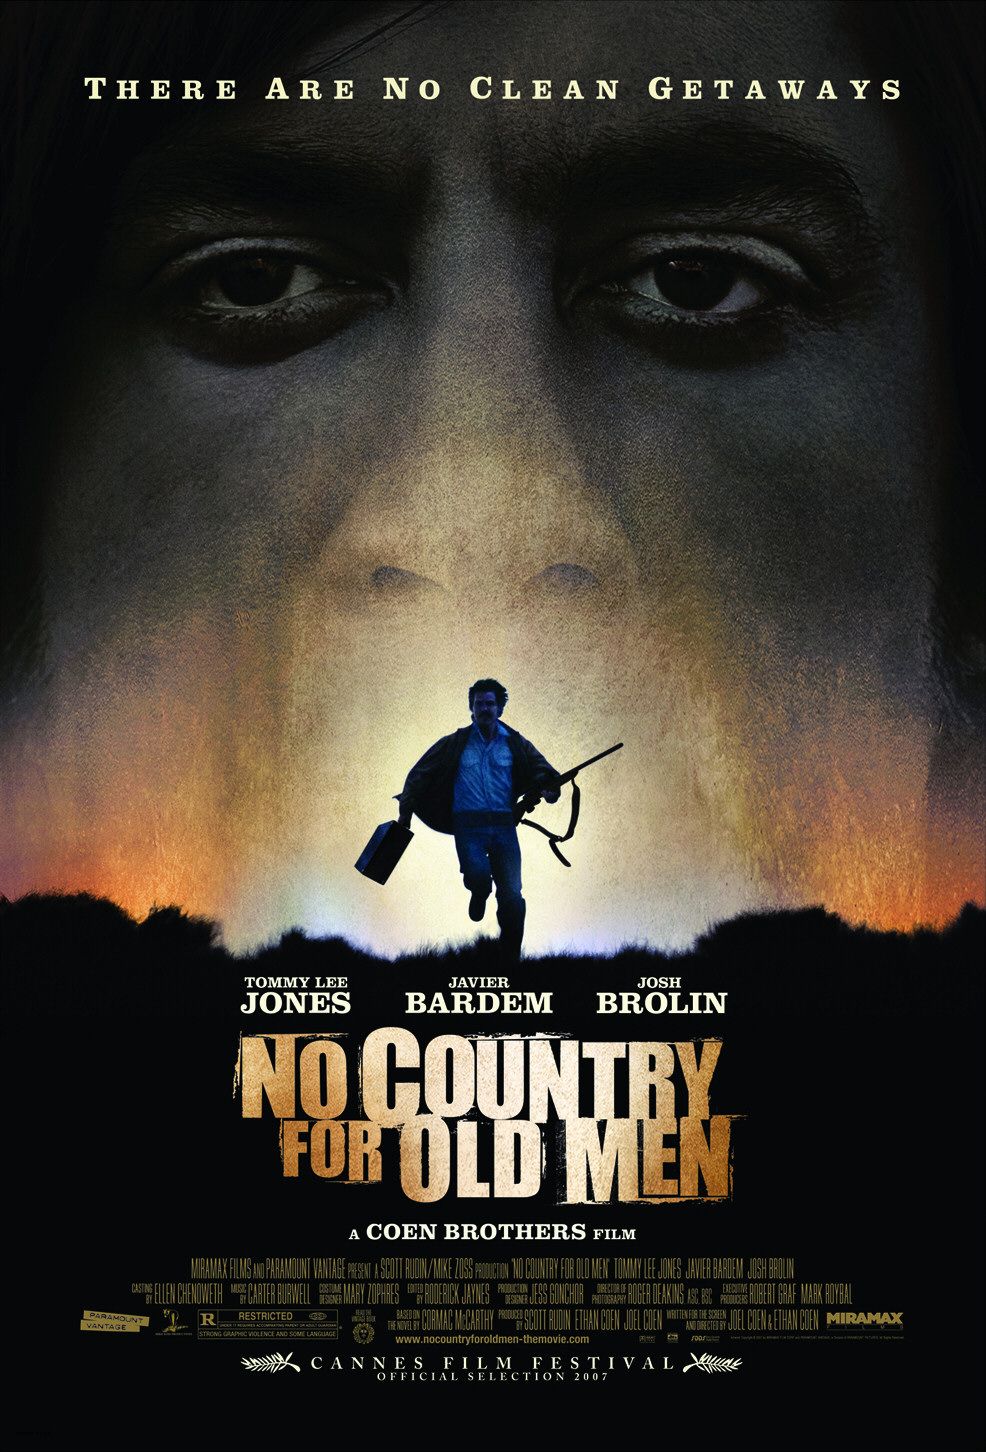 “No Country for Old Men”: A Coen Brothers Classic That Will Stay With You Long After You Watch It.